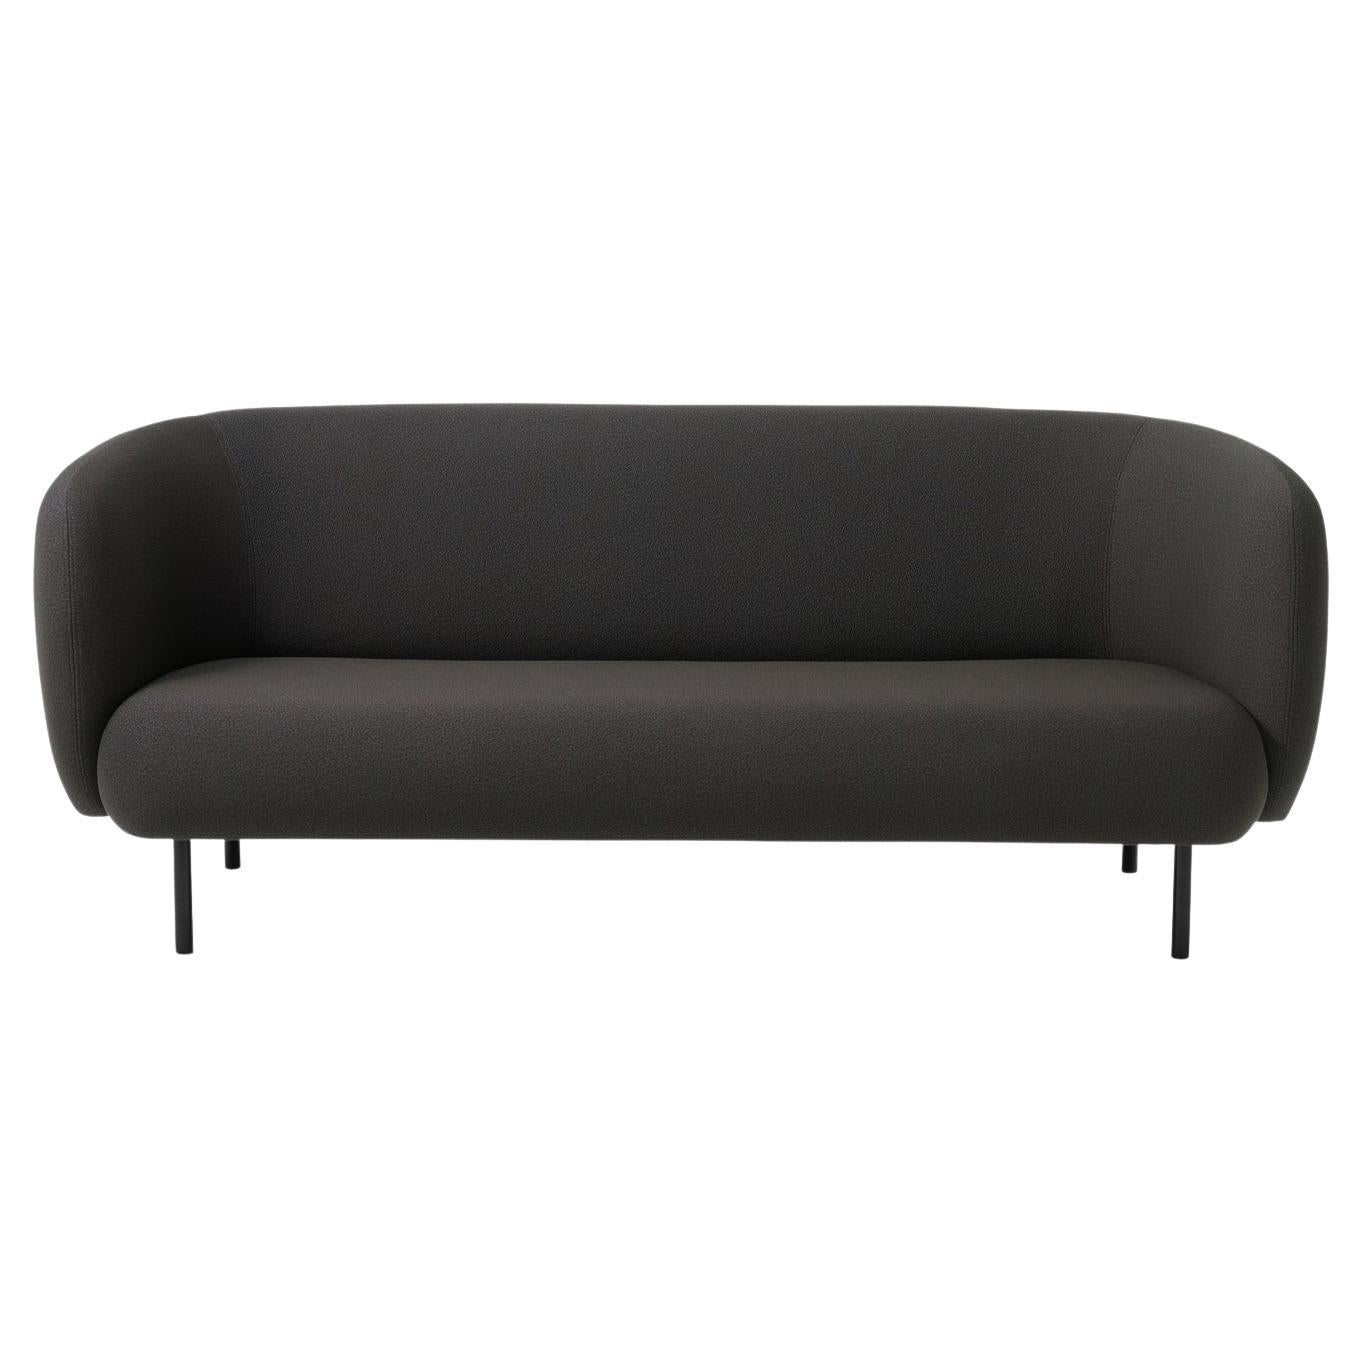 Caper 3 Seater Sprinkles Mocca by Warm Nordic For Sale